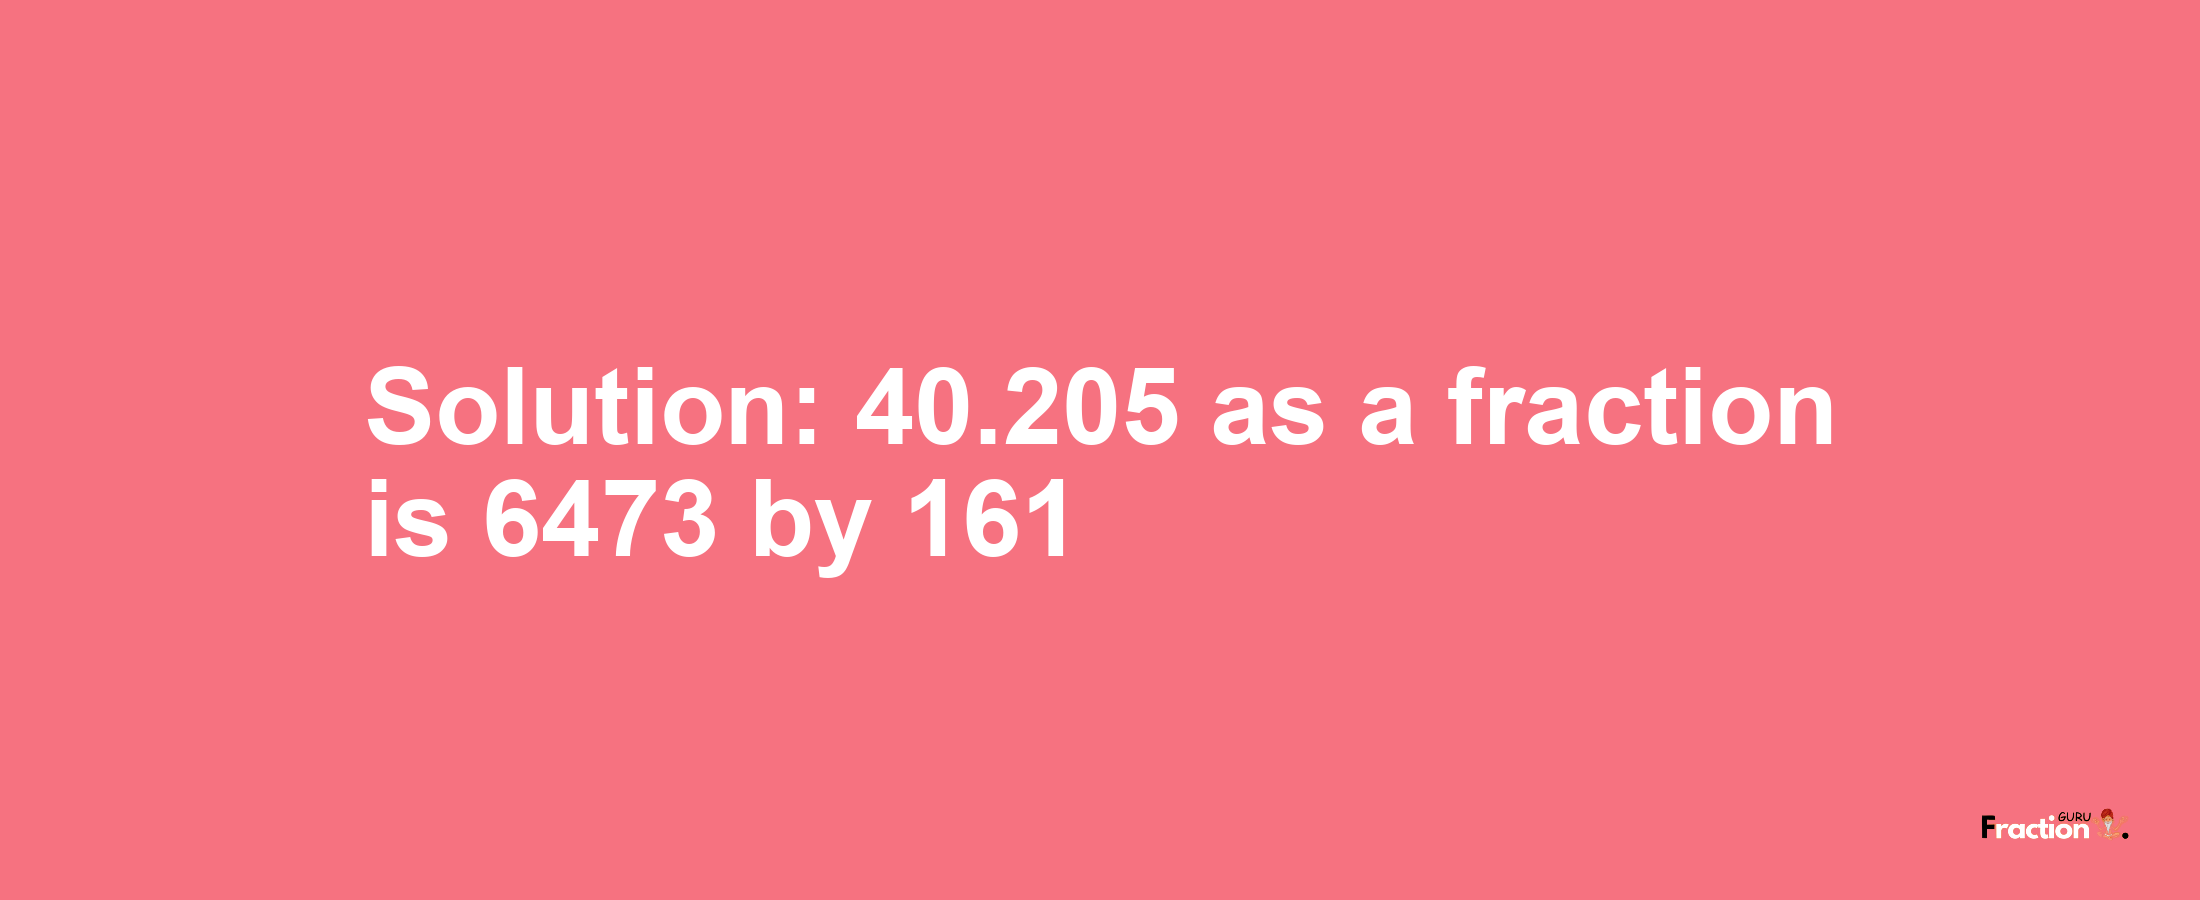 Solution:40.205 as a fraction is 6473/161